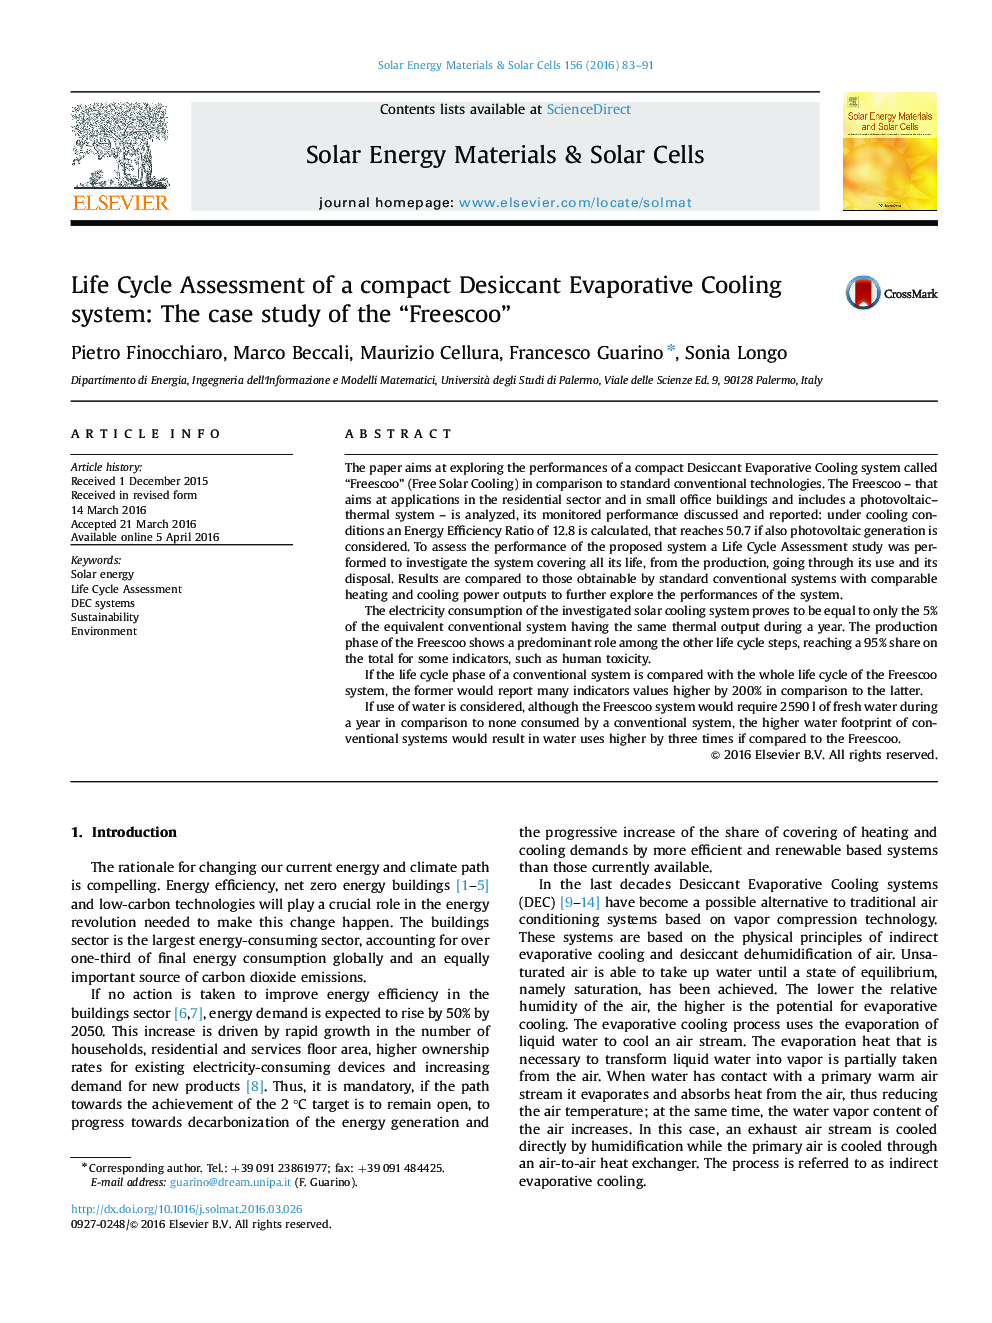 Life Cycle Assessment of a compact Desiccant Evaporative Cooling system: The case study of the “Freescoo”